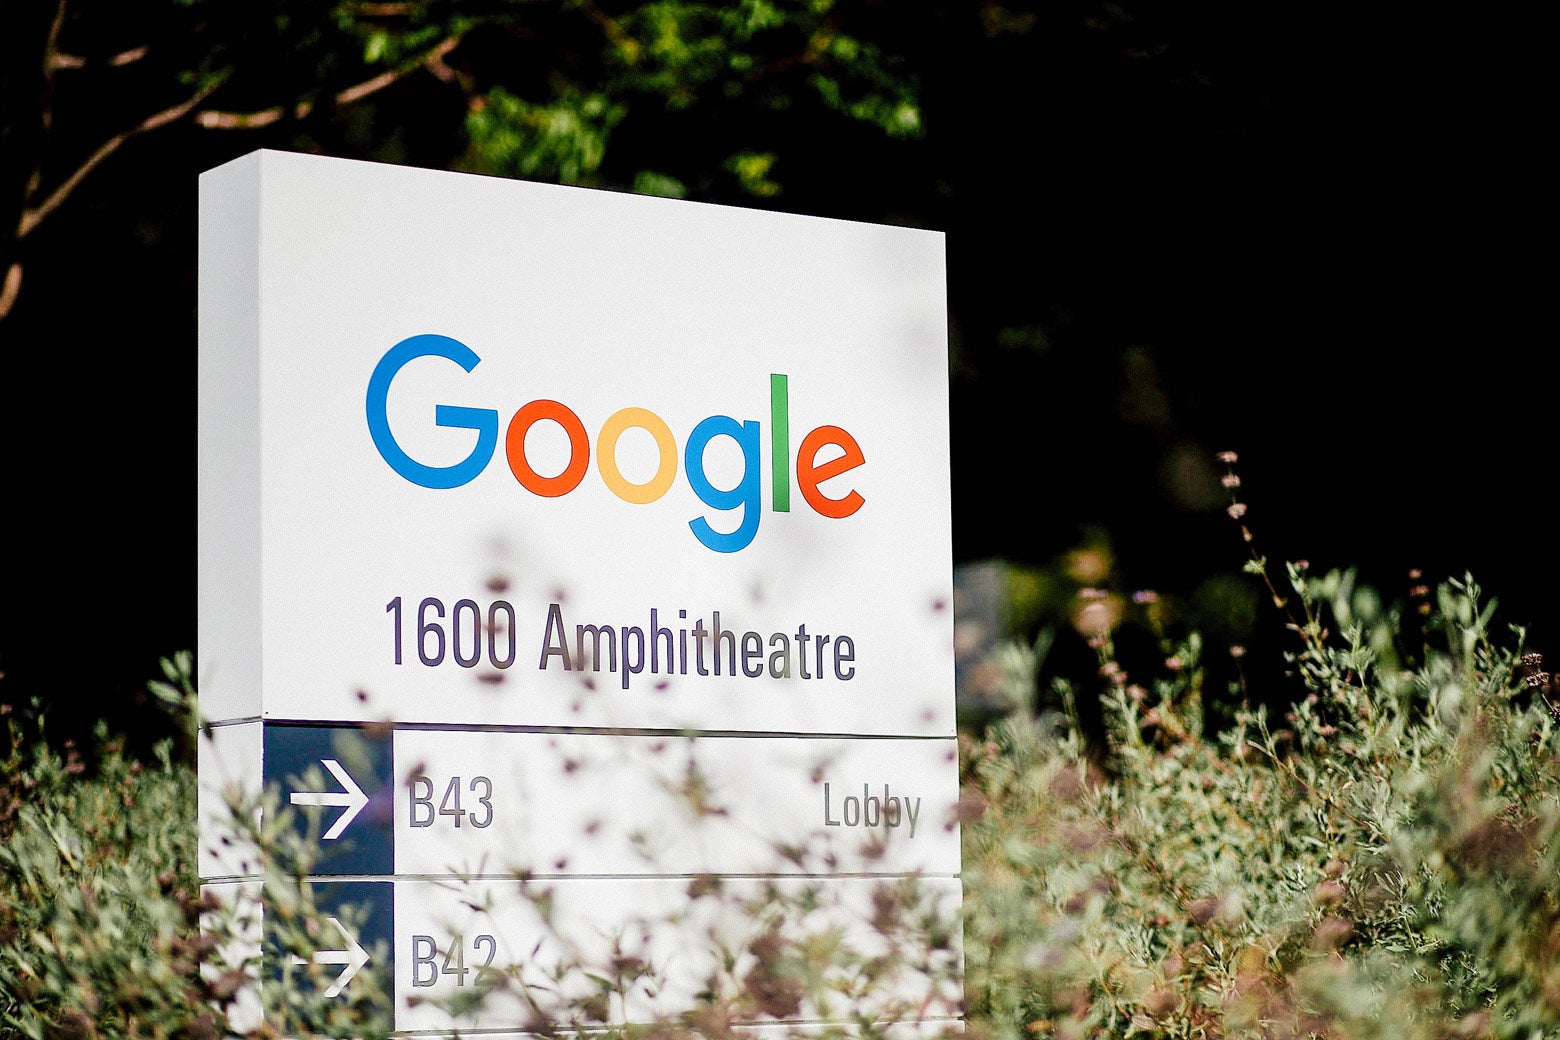 Google logo is displayed on a sign.